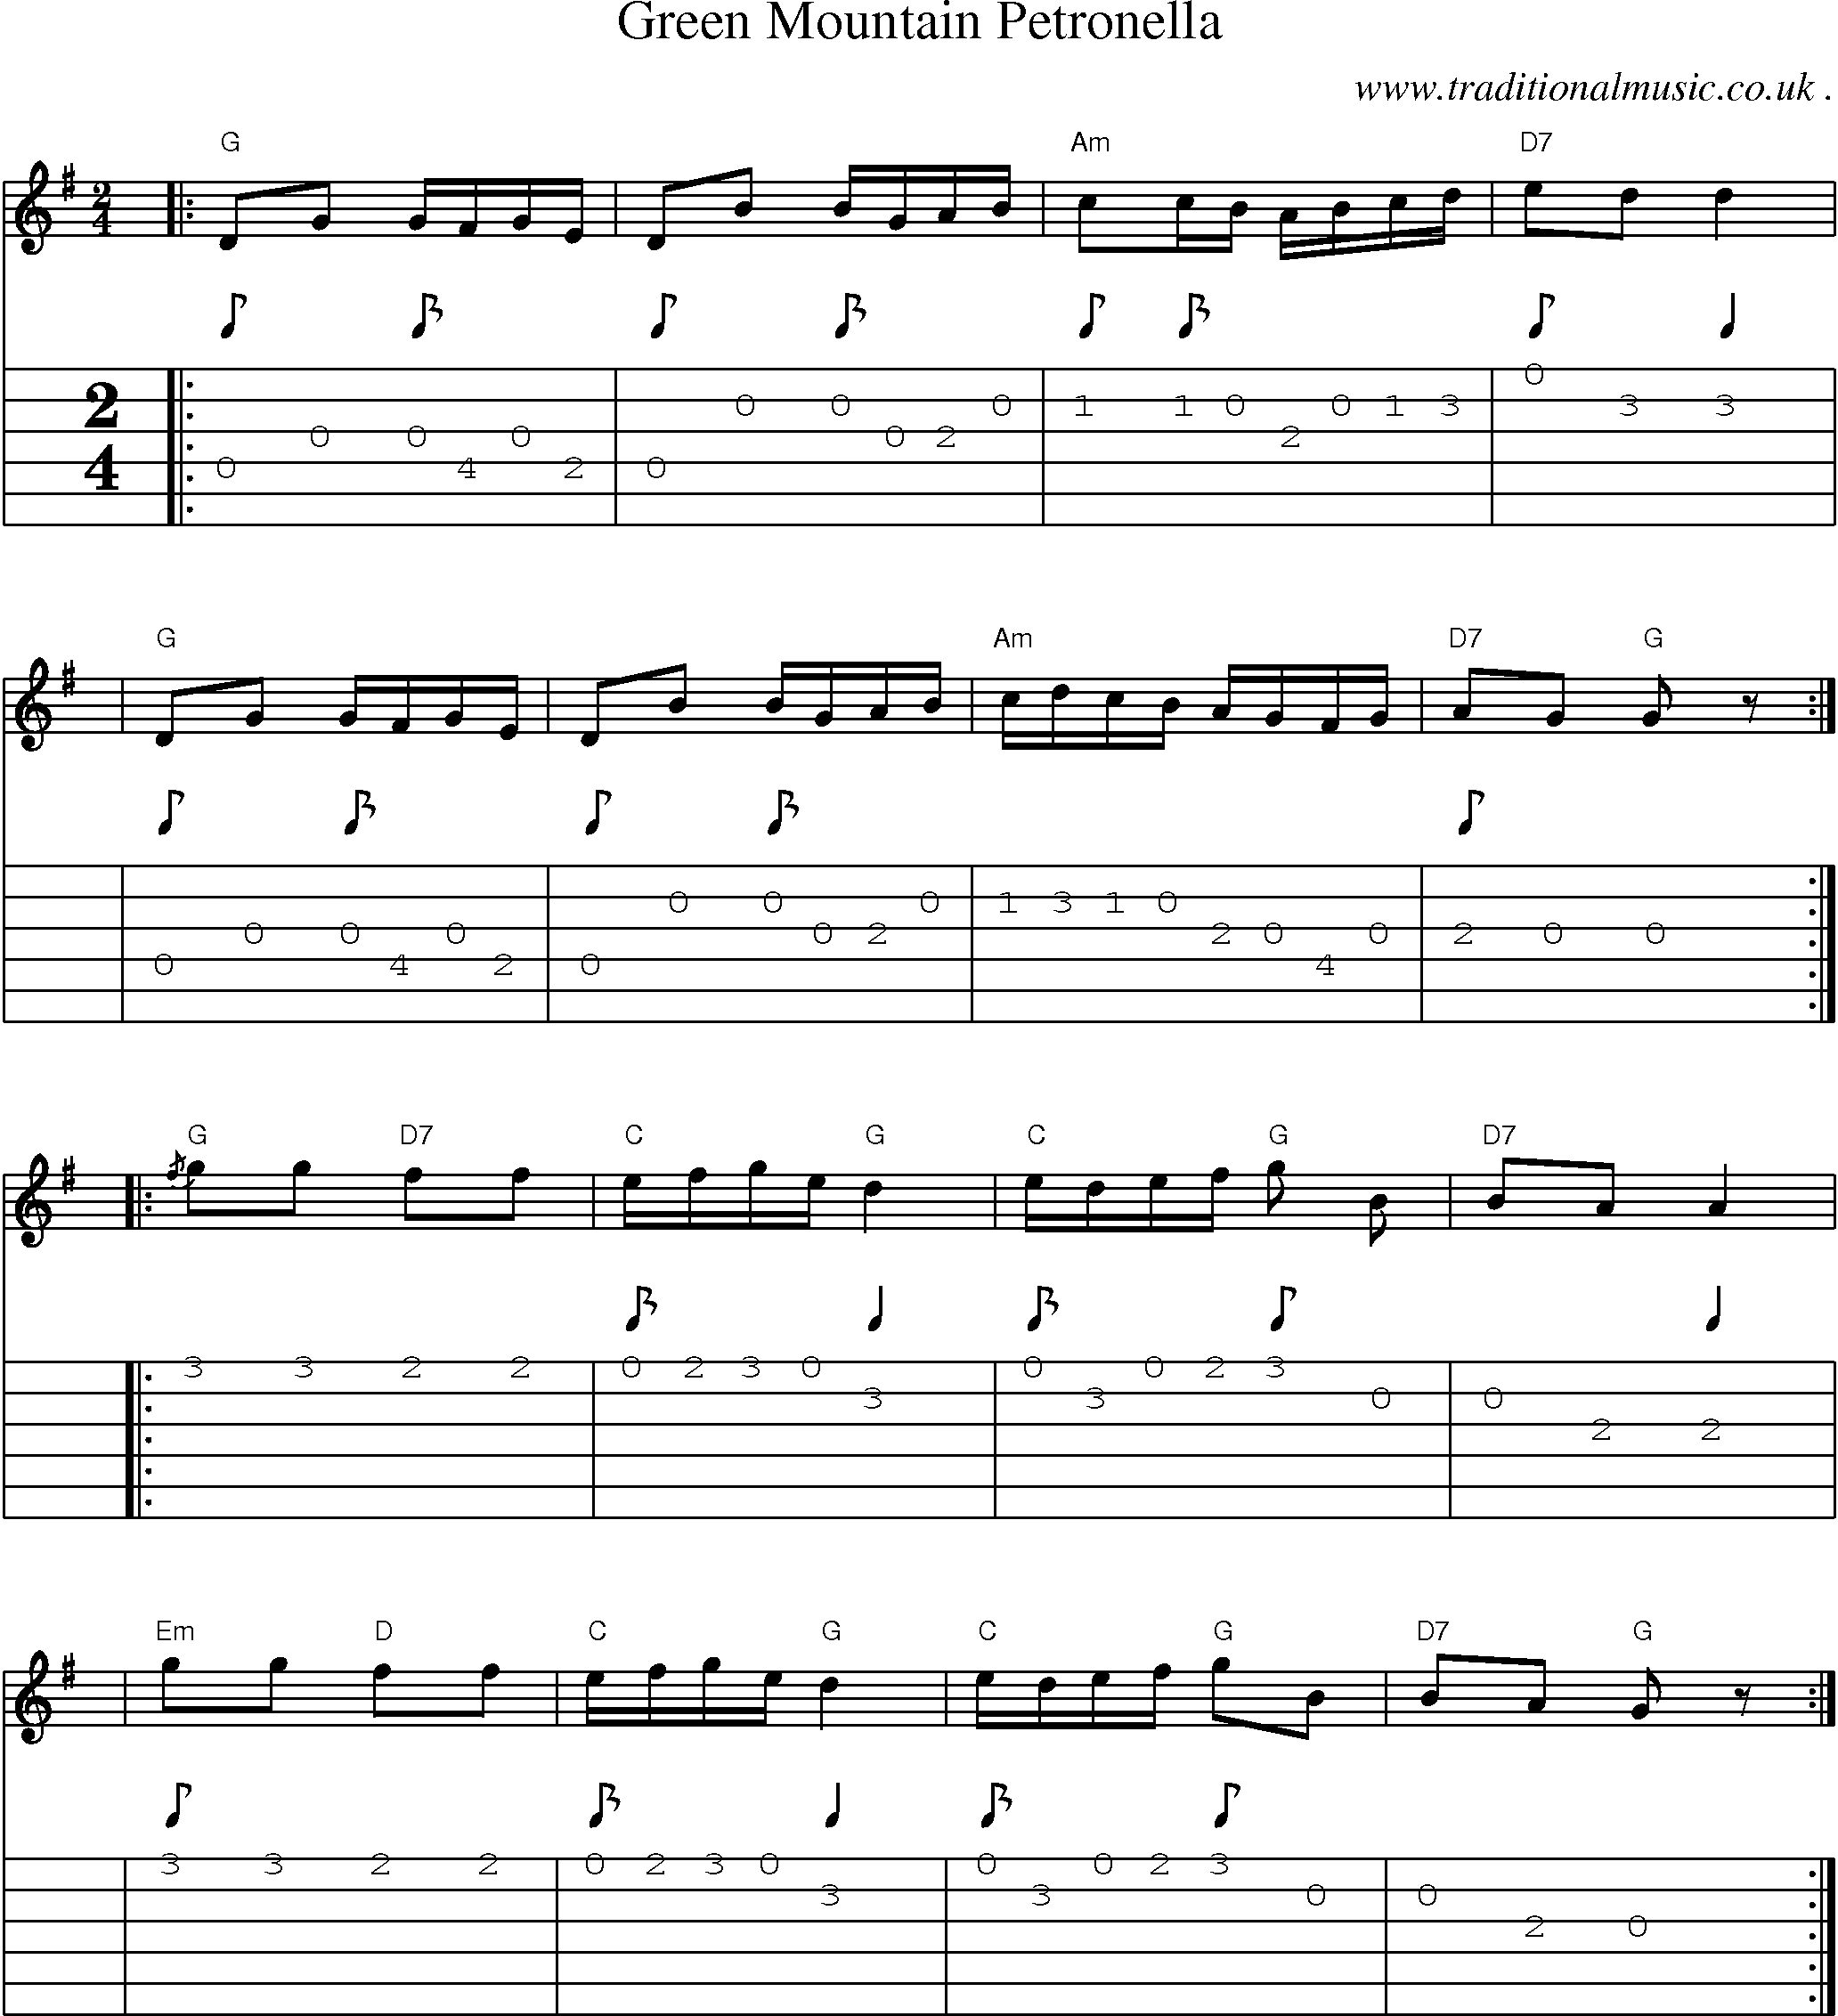 Sheet-music  score, Chords and Guitar Tabs for Green Mountain Petronella